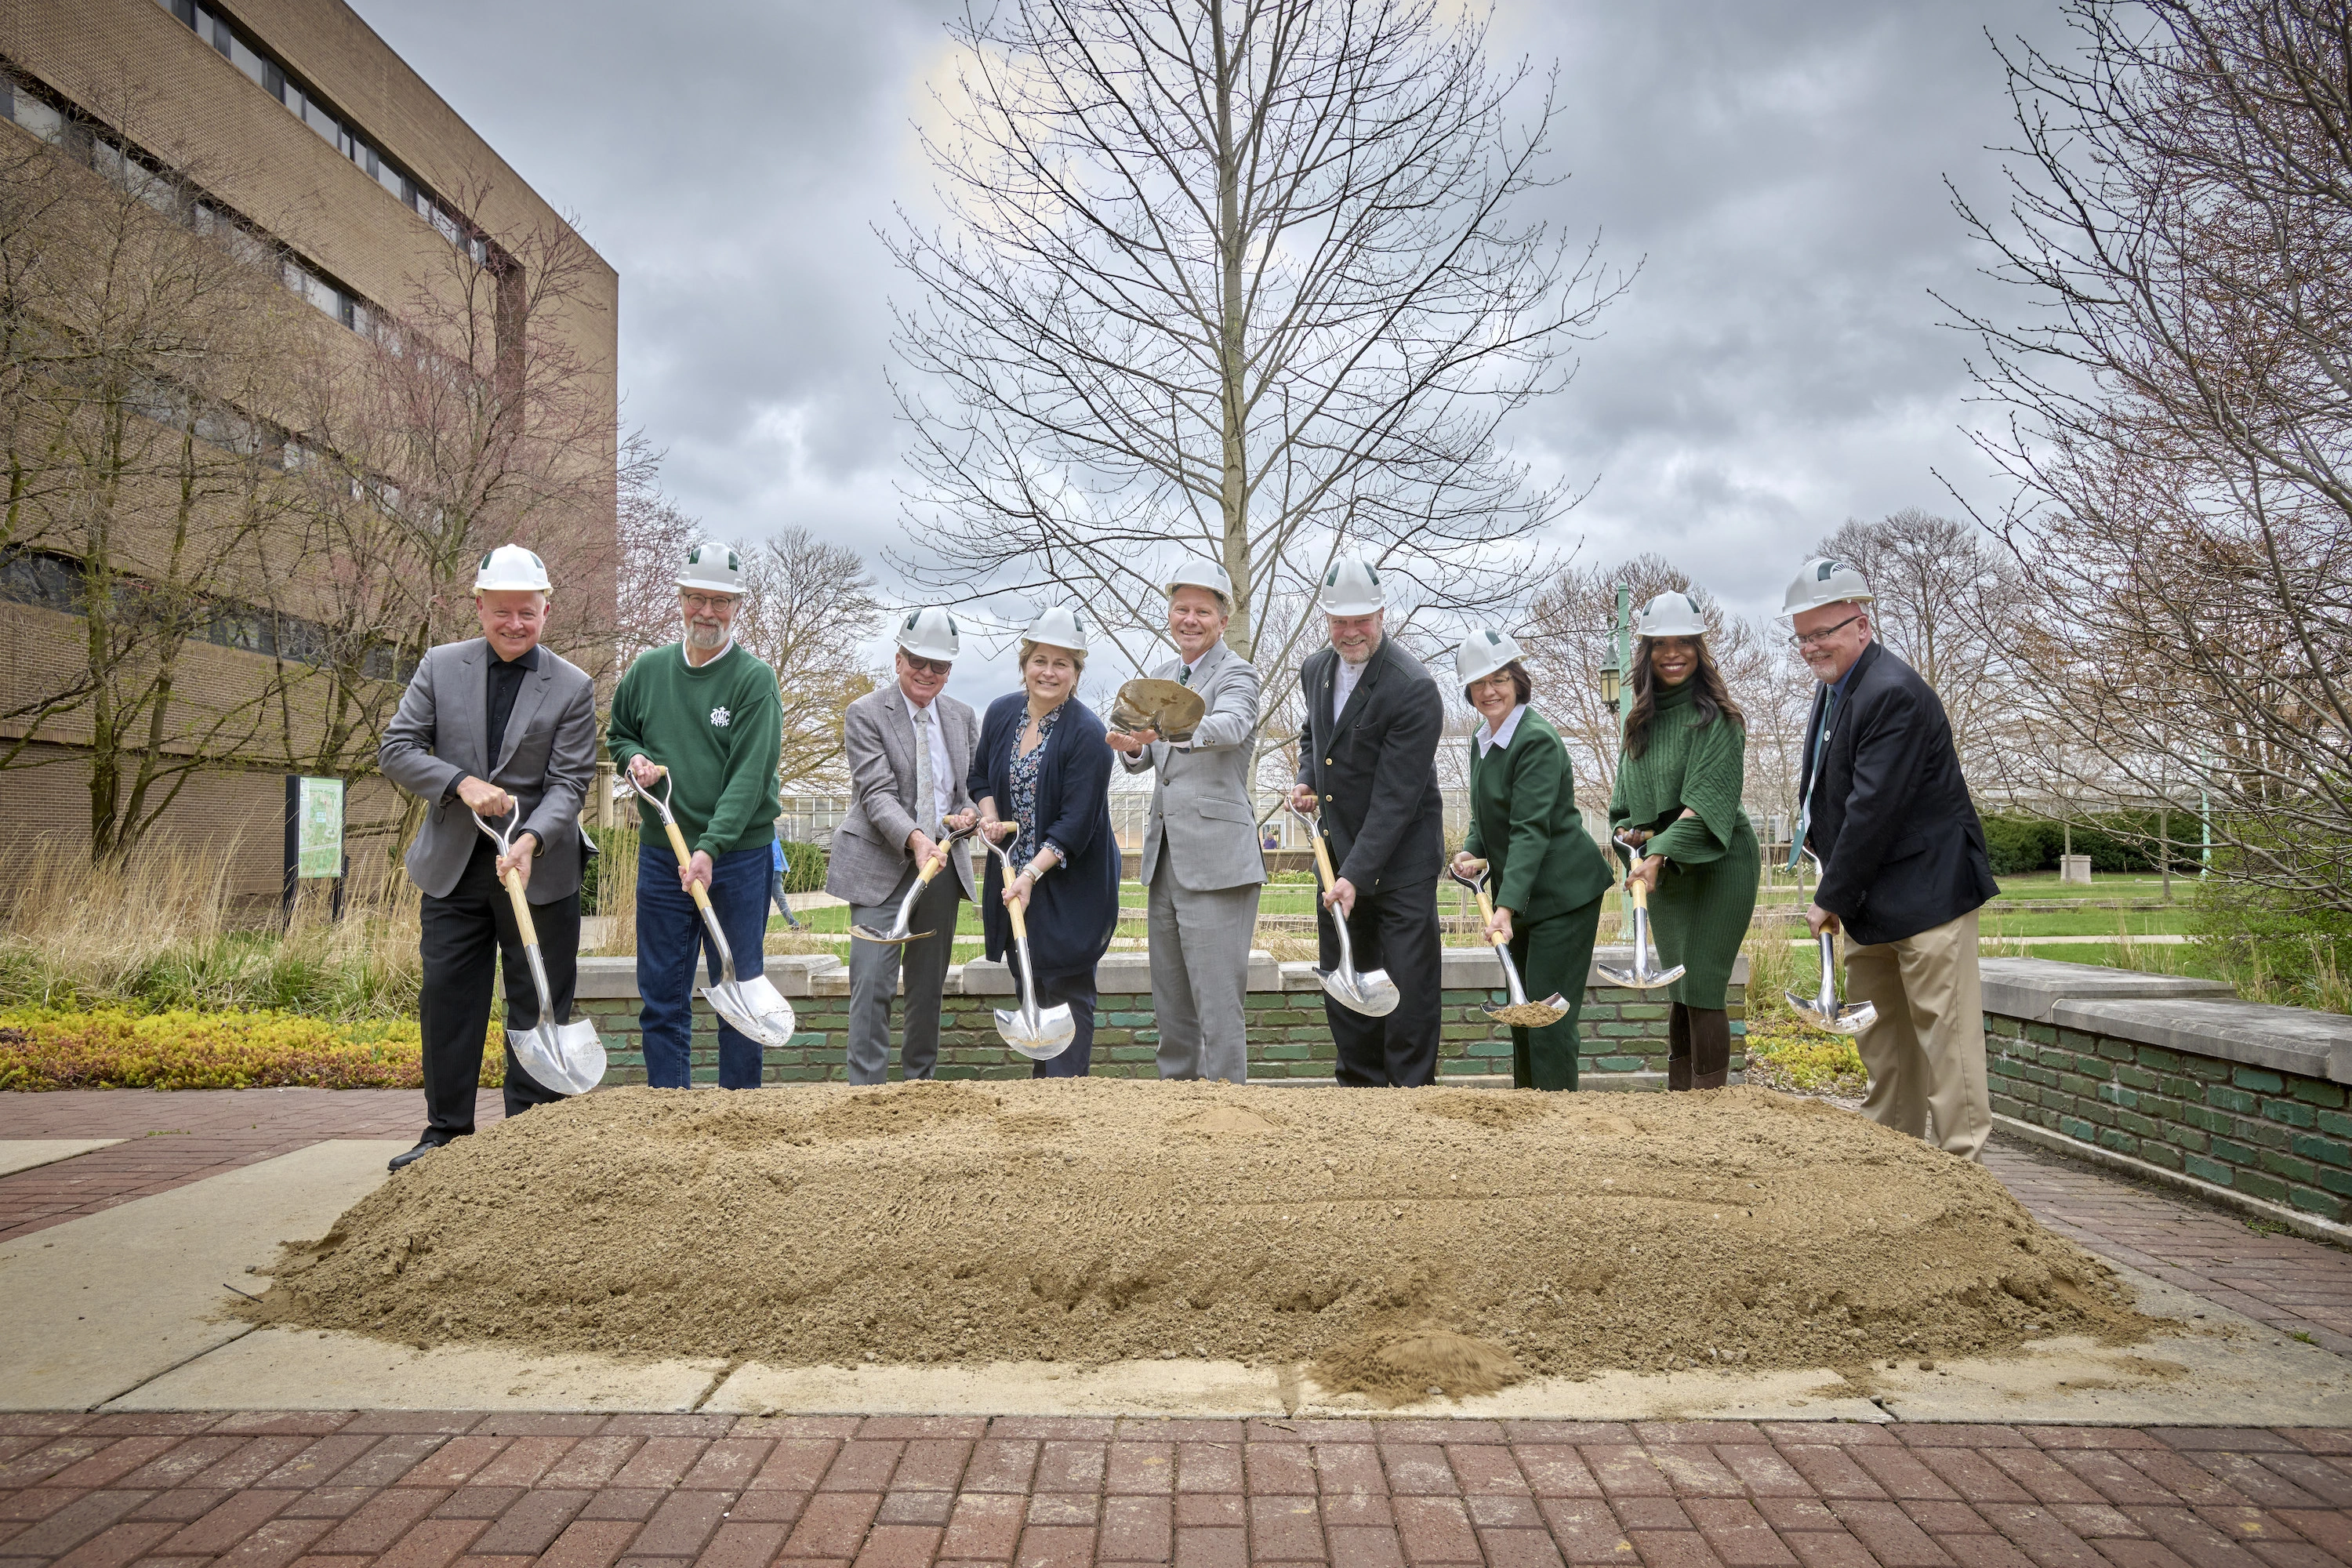 MSU leaders pose with shoves in front of a pile of dirt at a groundbreaking ceremony.